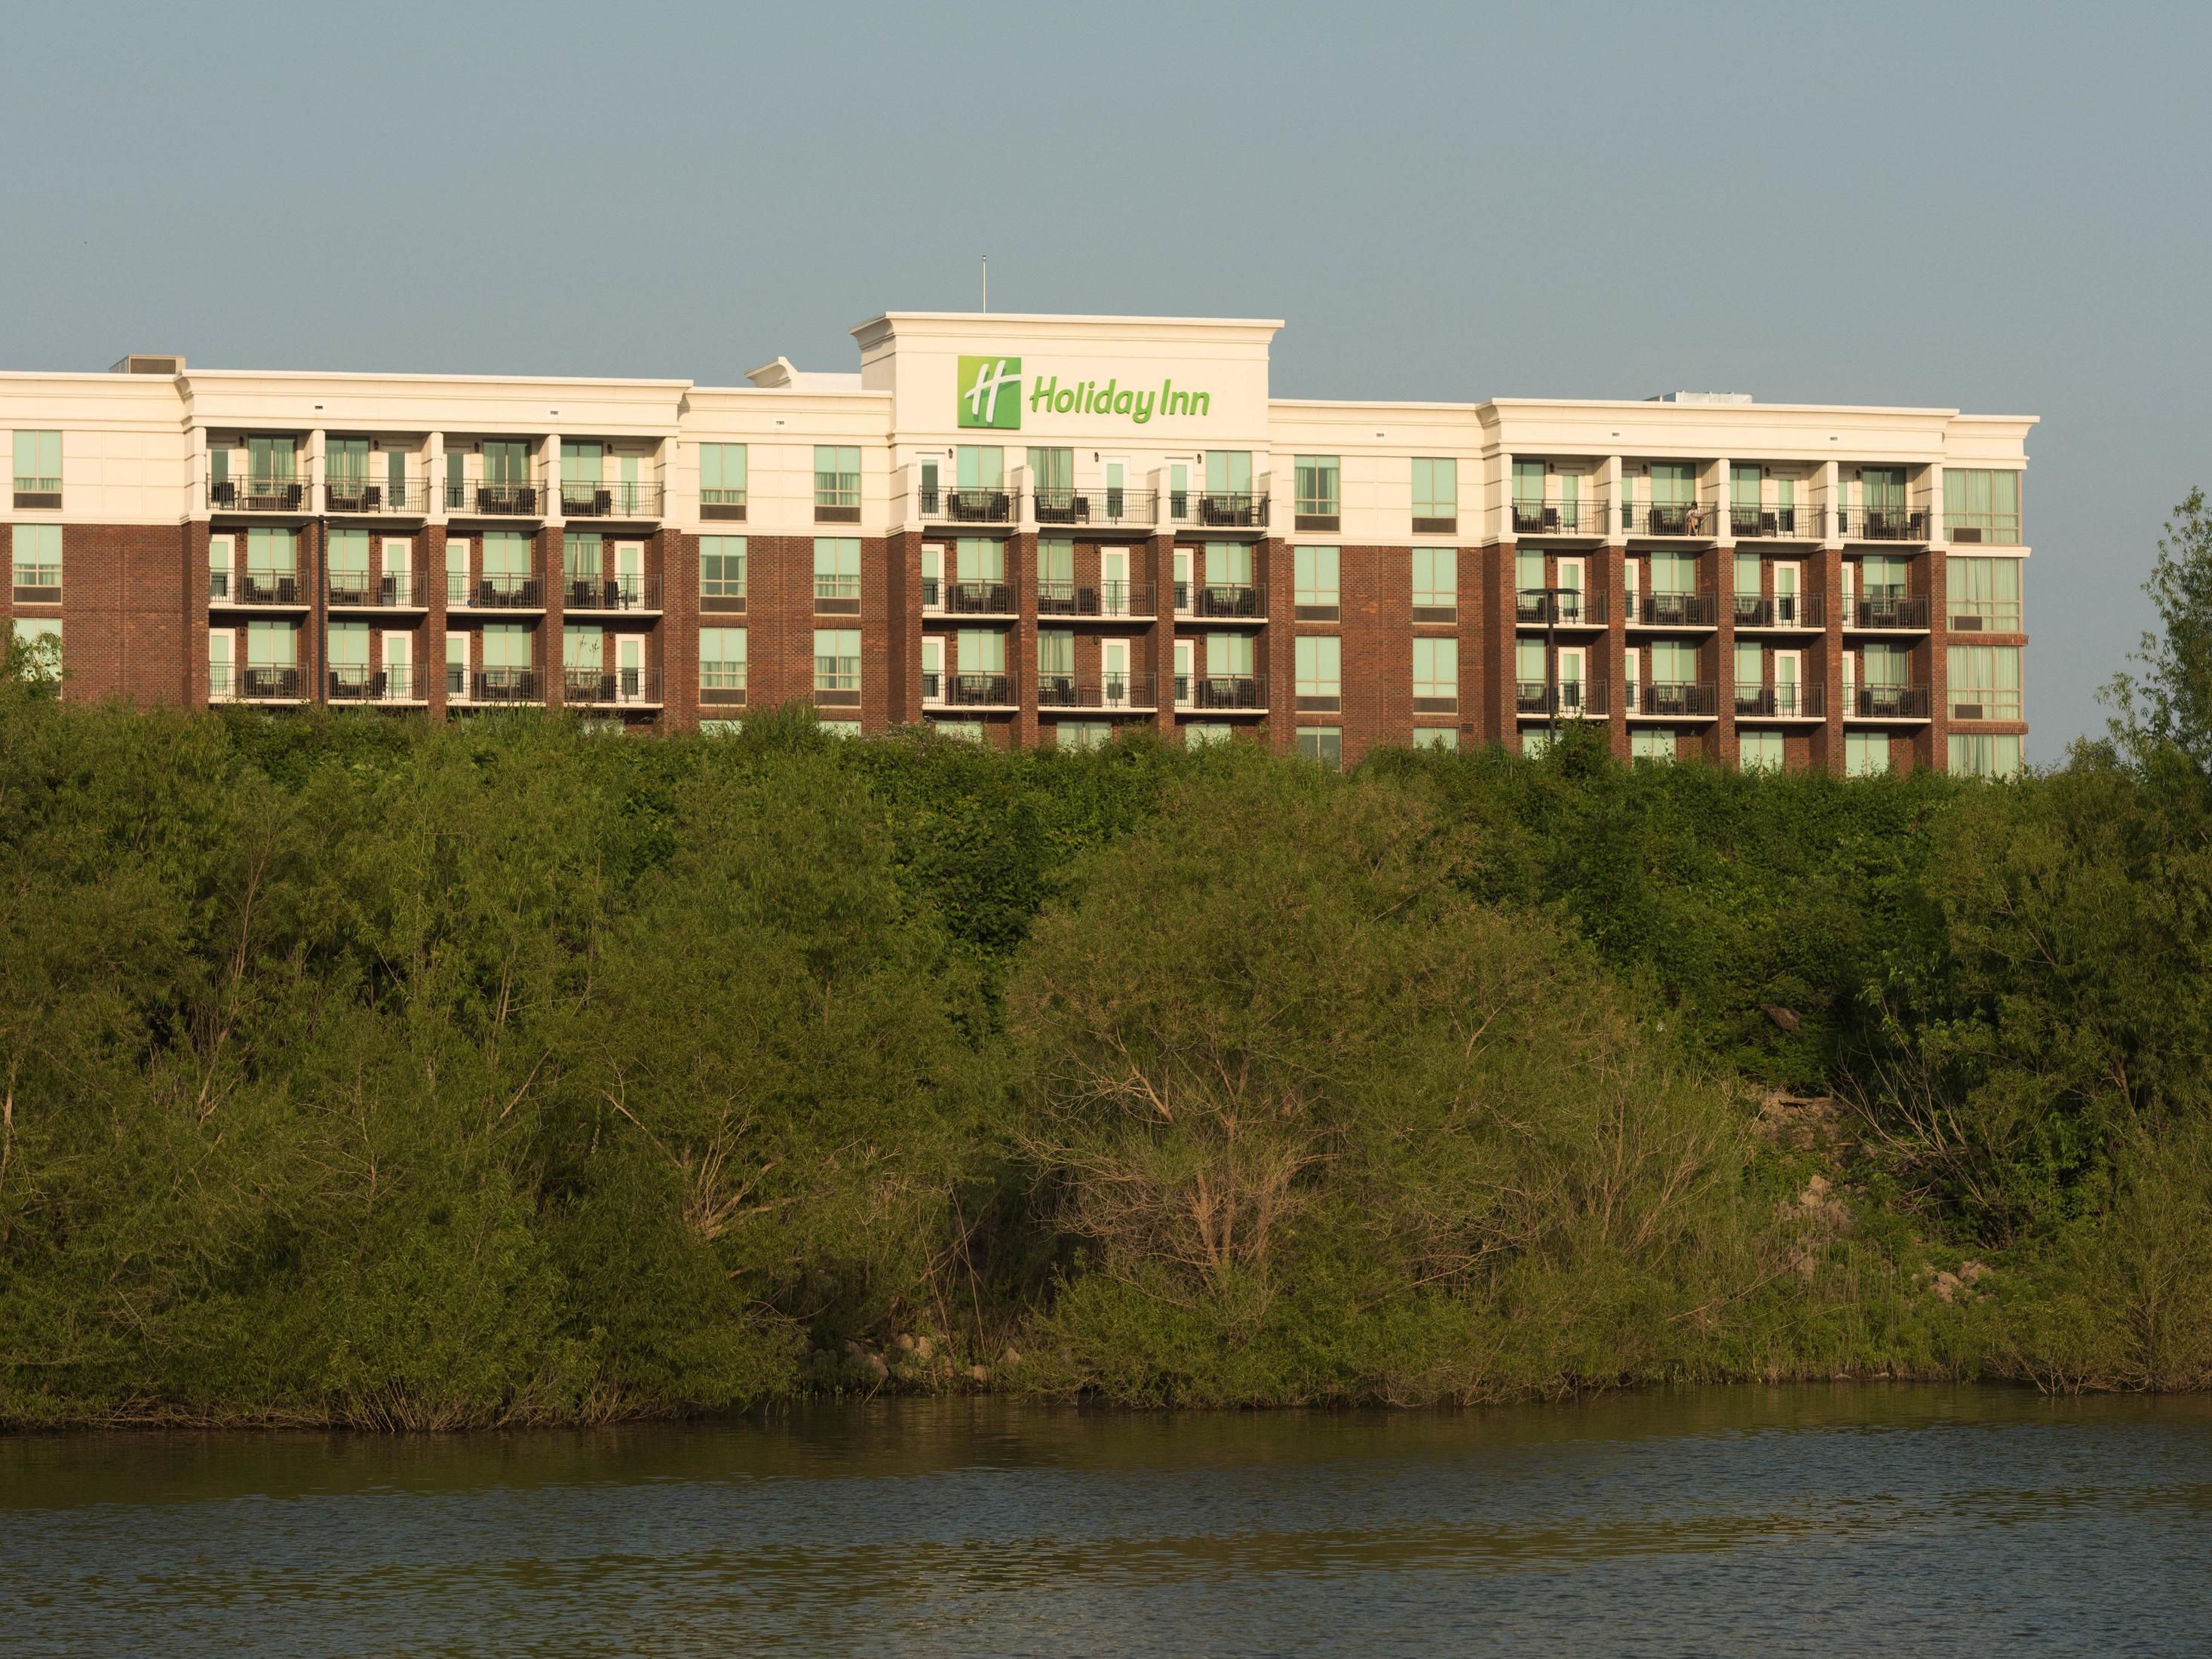 Stay with us and enjoy walking and sitting along the Banks of the Ohio River.